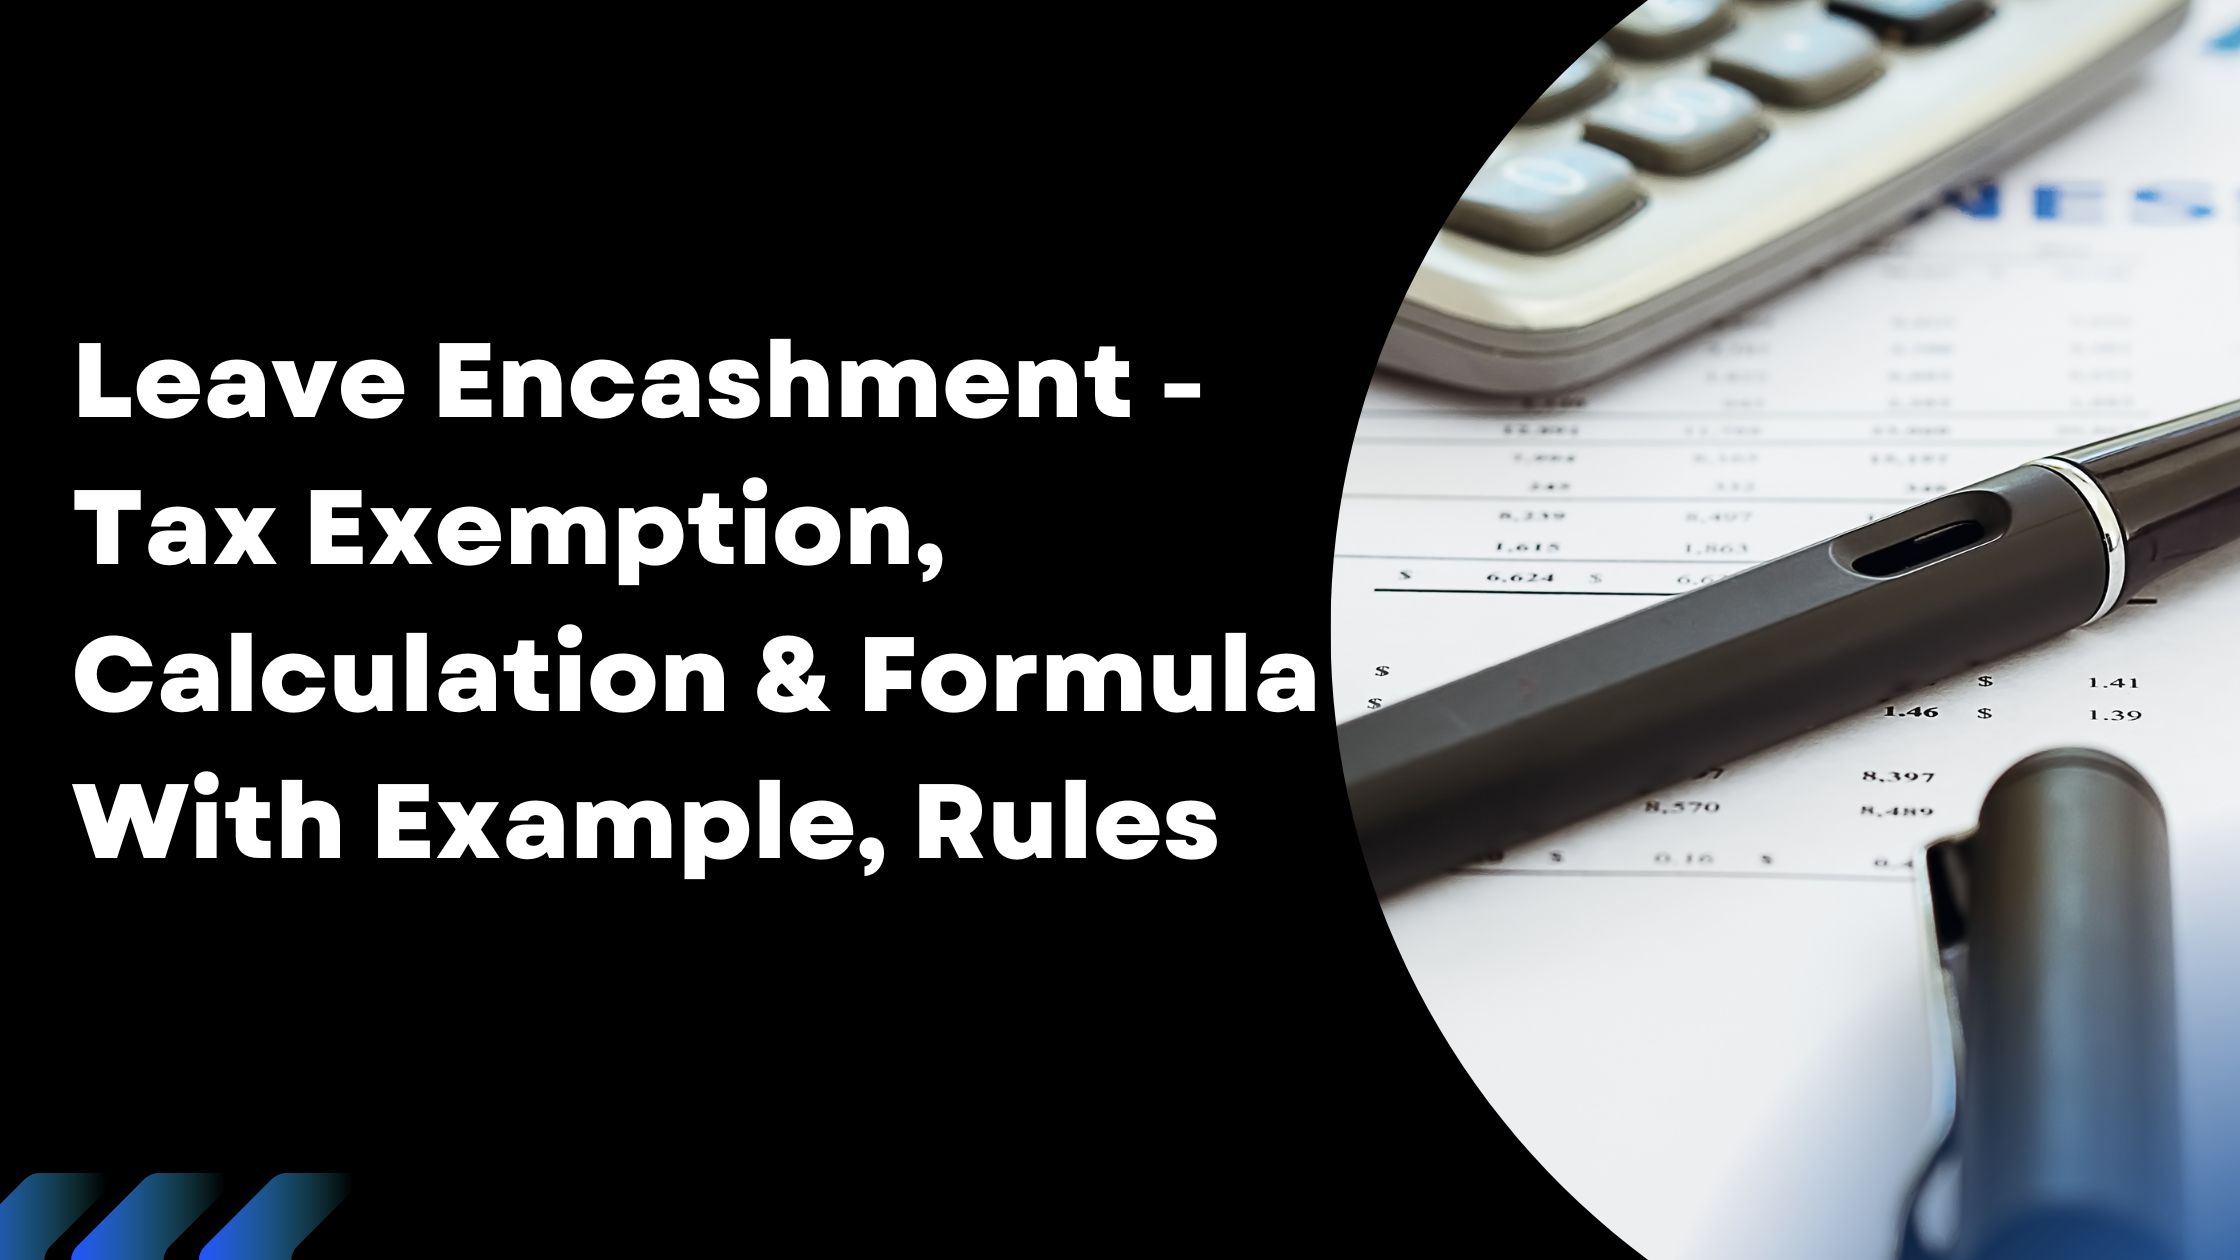 Leave Encashment - Tax Exemption, Calculation & Formula With Example, Rules